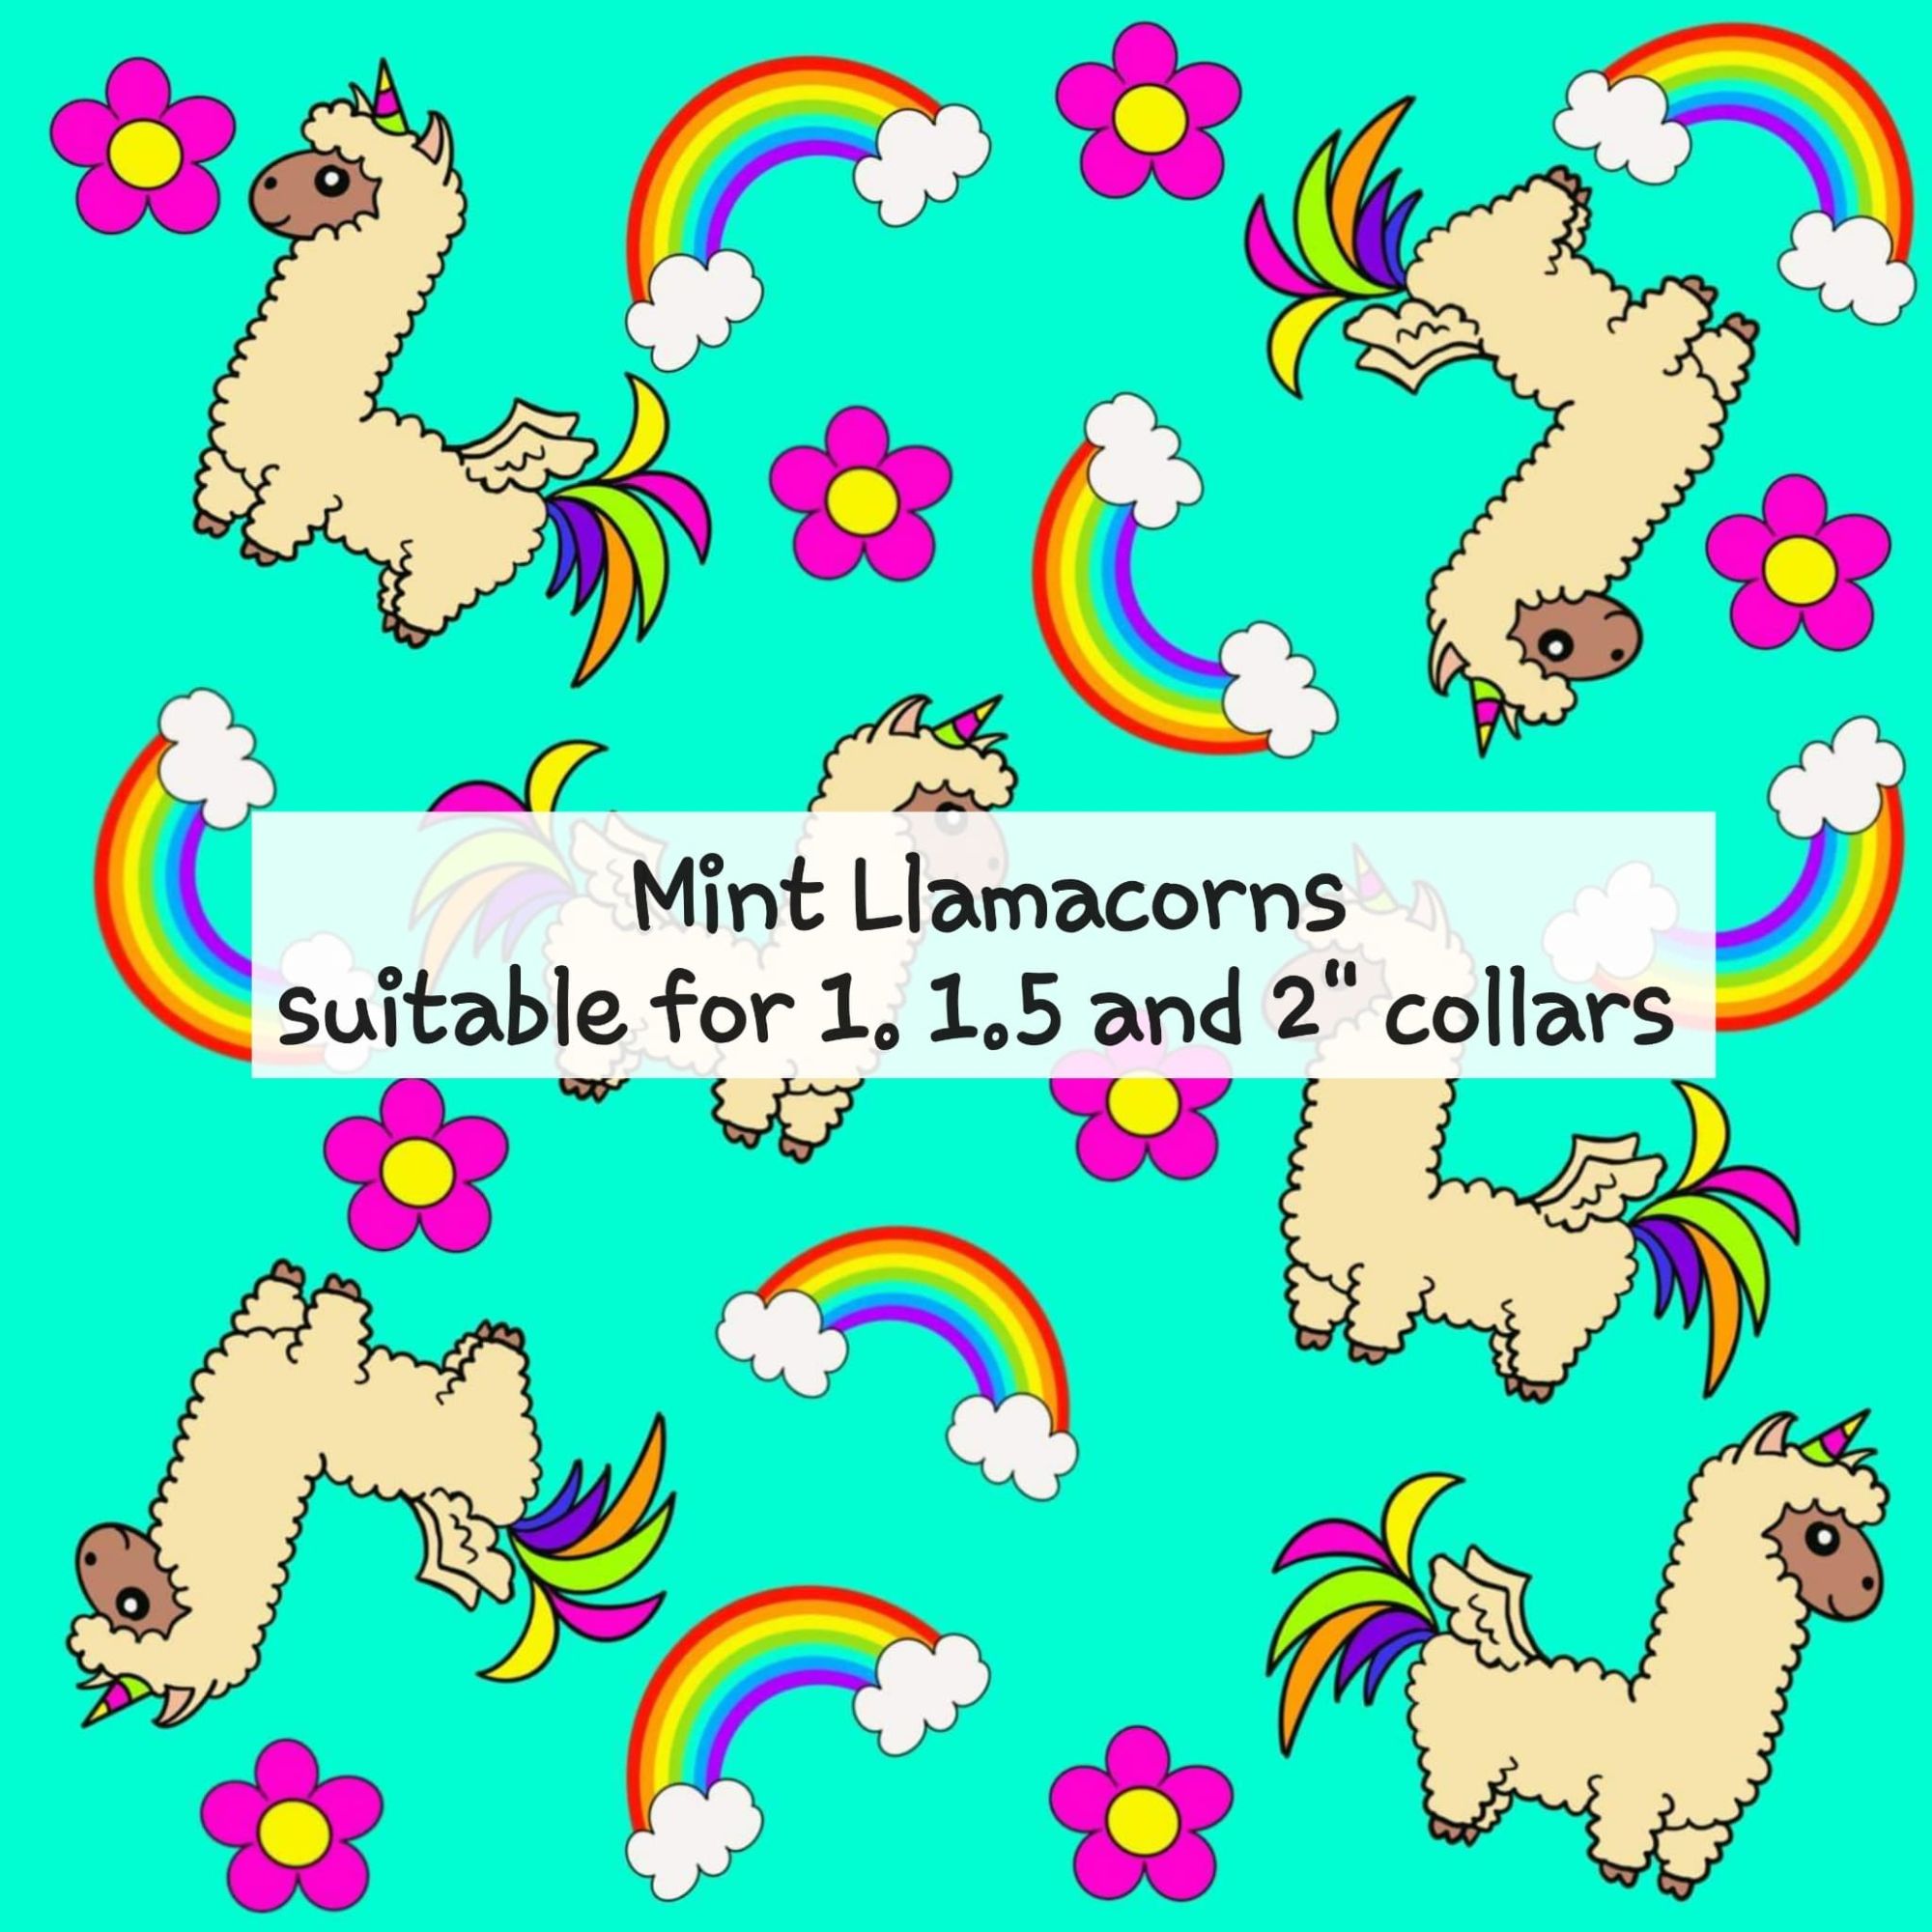 Mint Llamacorns - Suitable for 1, 1.5 and 2 inch collars